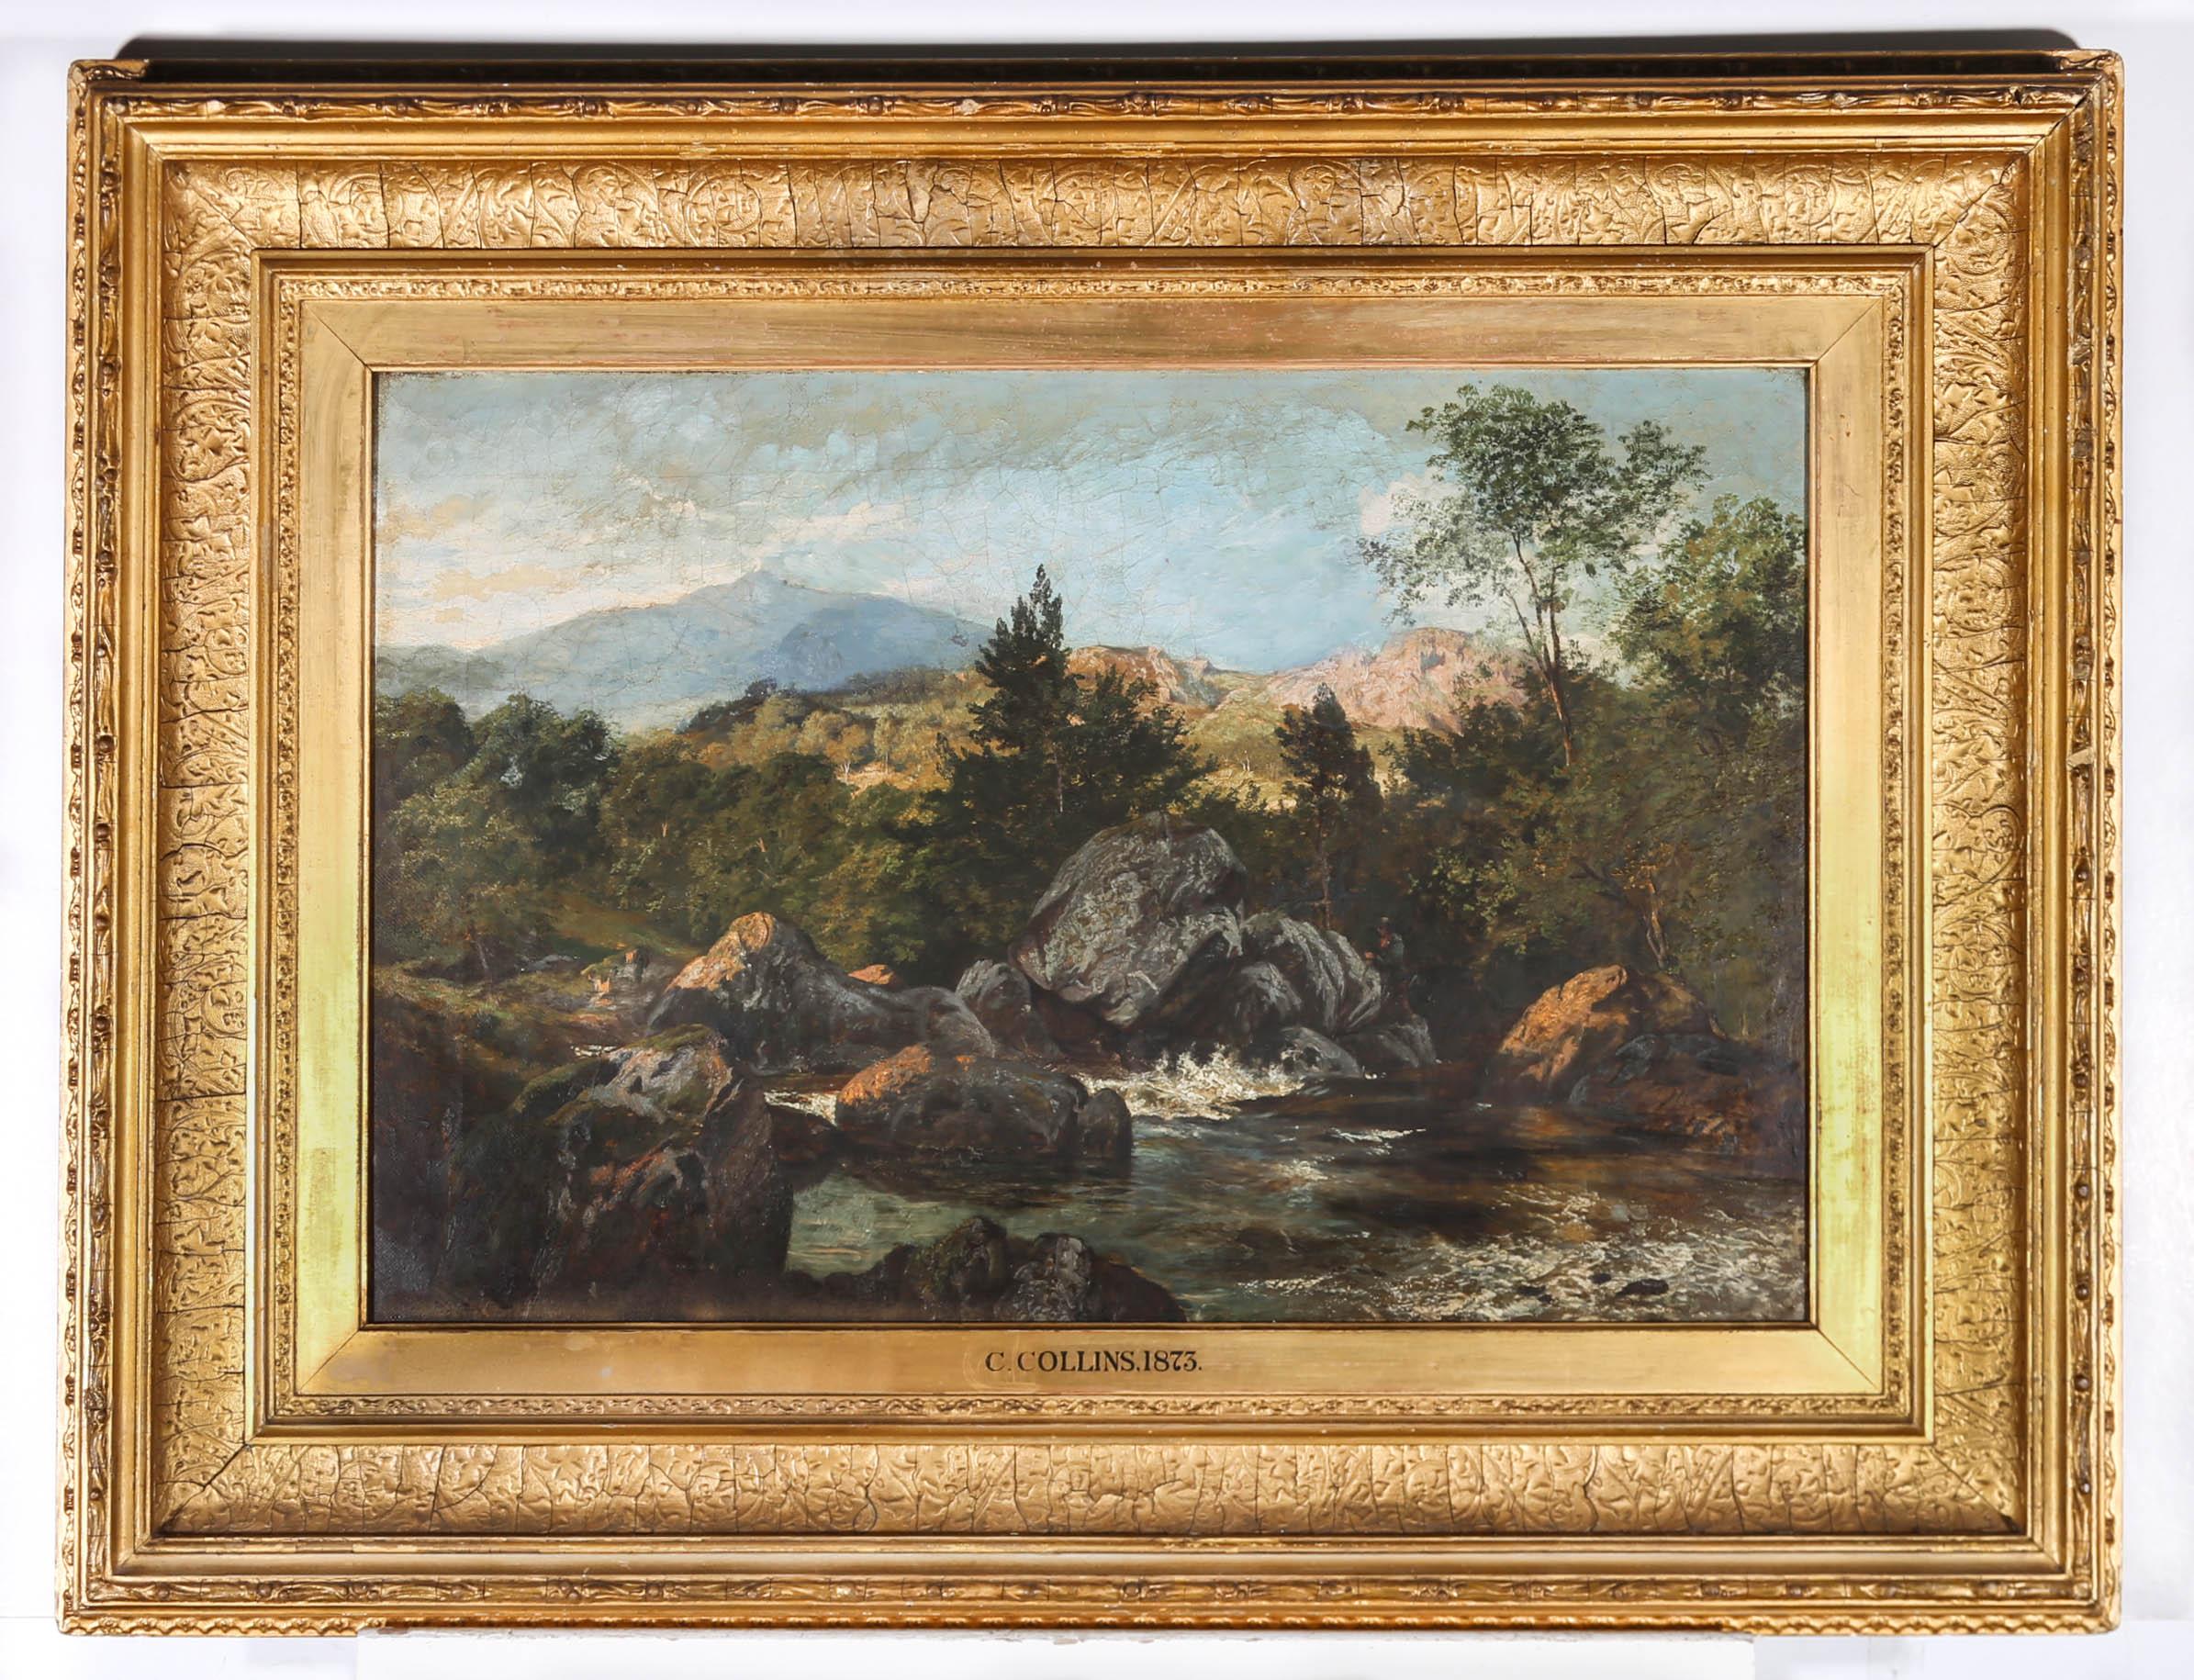 A fine 19th Century oil depiction of a rocky stretch of the Lledr river in Wales. A figure can be seen fishing at the right bank with late afternoon sunlight illuminating the rocks. The artist has signed, dated and inscribed to the reverse and the